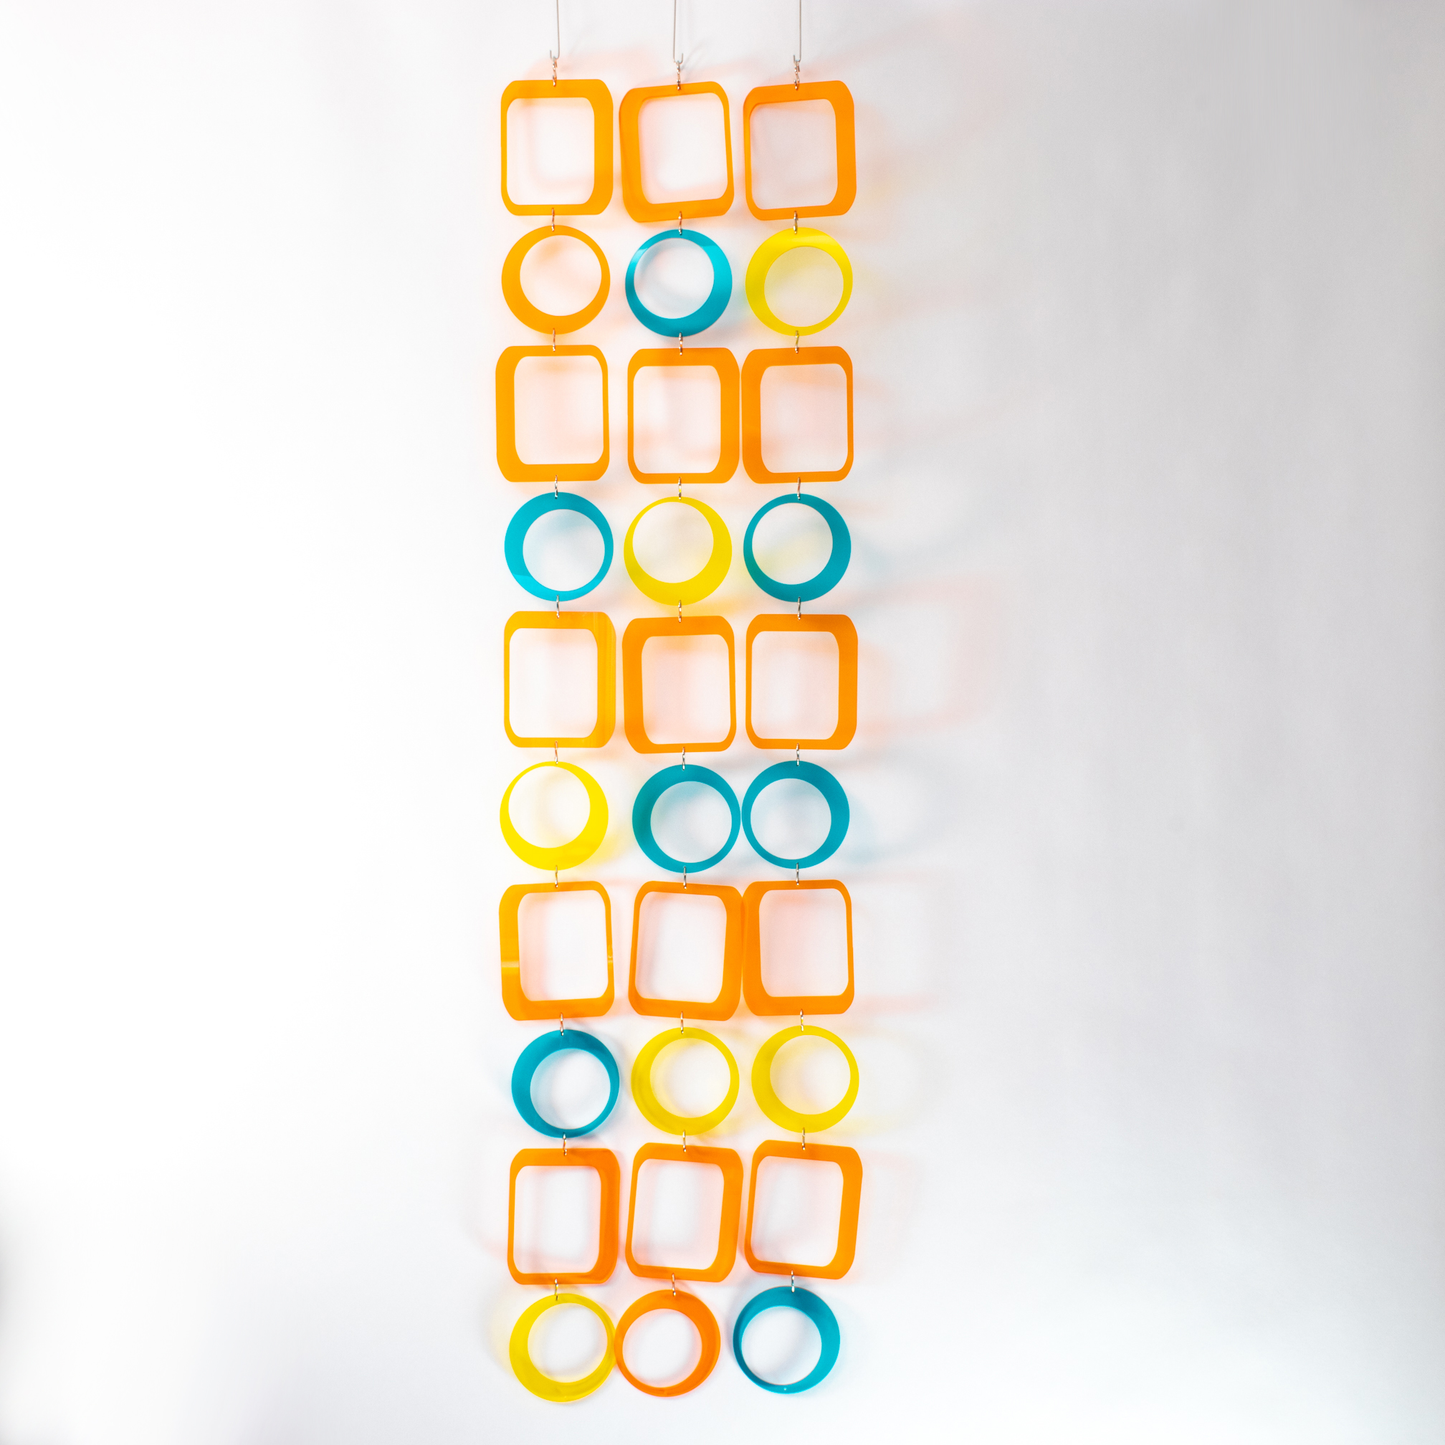 Full view of Beautiful DIY Kit to make mobile, room divider, window treatment, or wall art in clear orange, teal, yellow by AtomicMobiles.com 